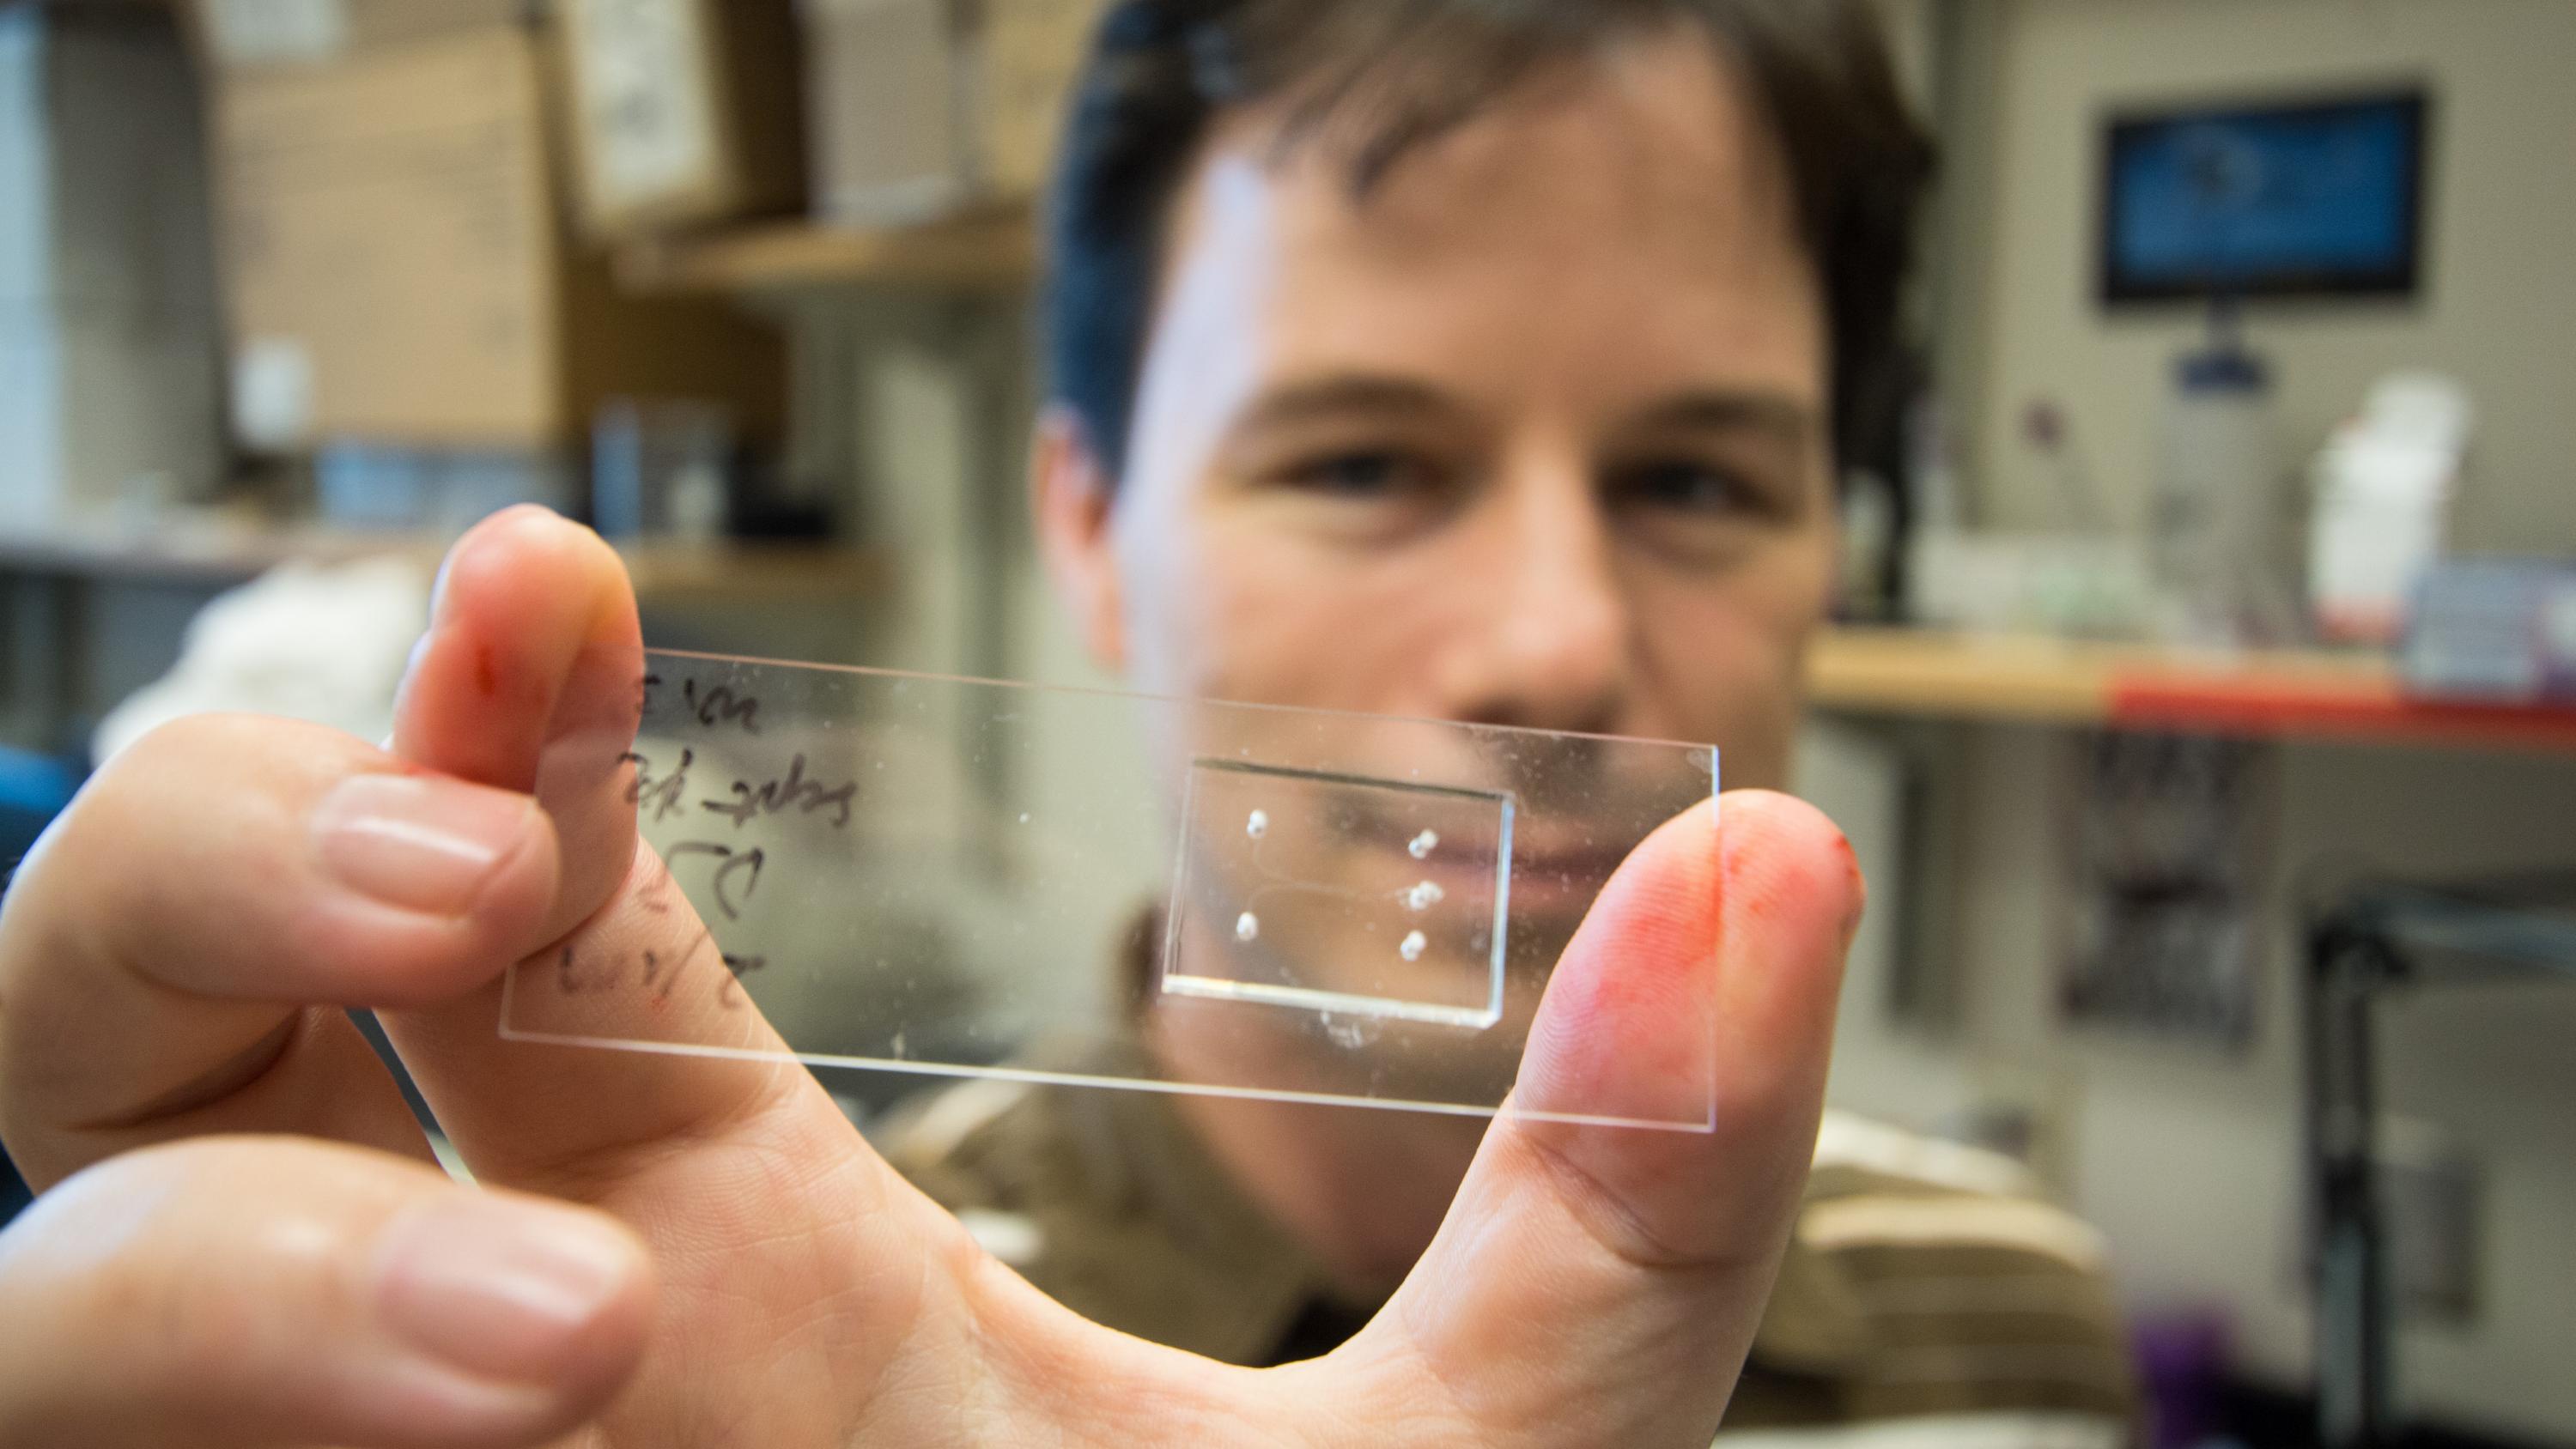 Todd Sulchek is an associate professor of mechanical engineering in Georgia Tech’s George W. Woodruff School of Mechanical Engineering. He's holding a microfluidic chip designed to sort cells based on their softness. (Credit: Maxwell Guberman, Georgia Tech)